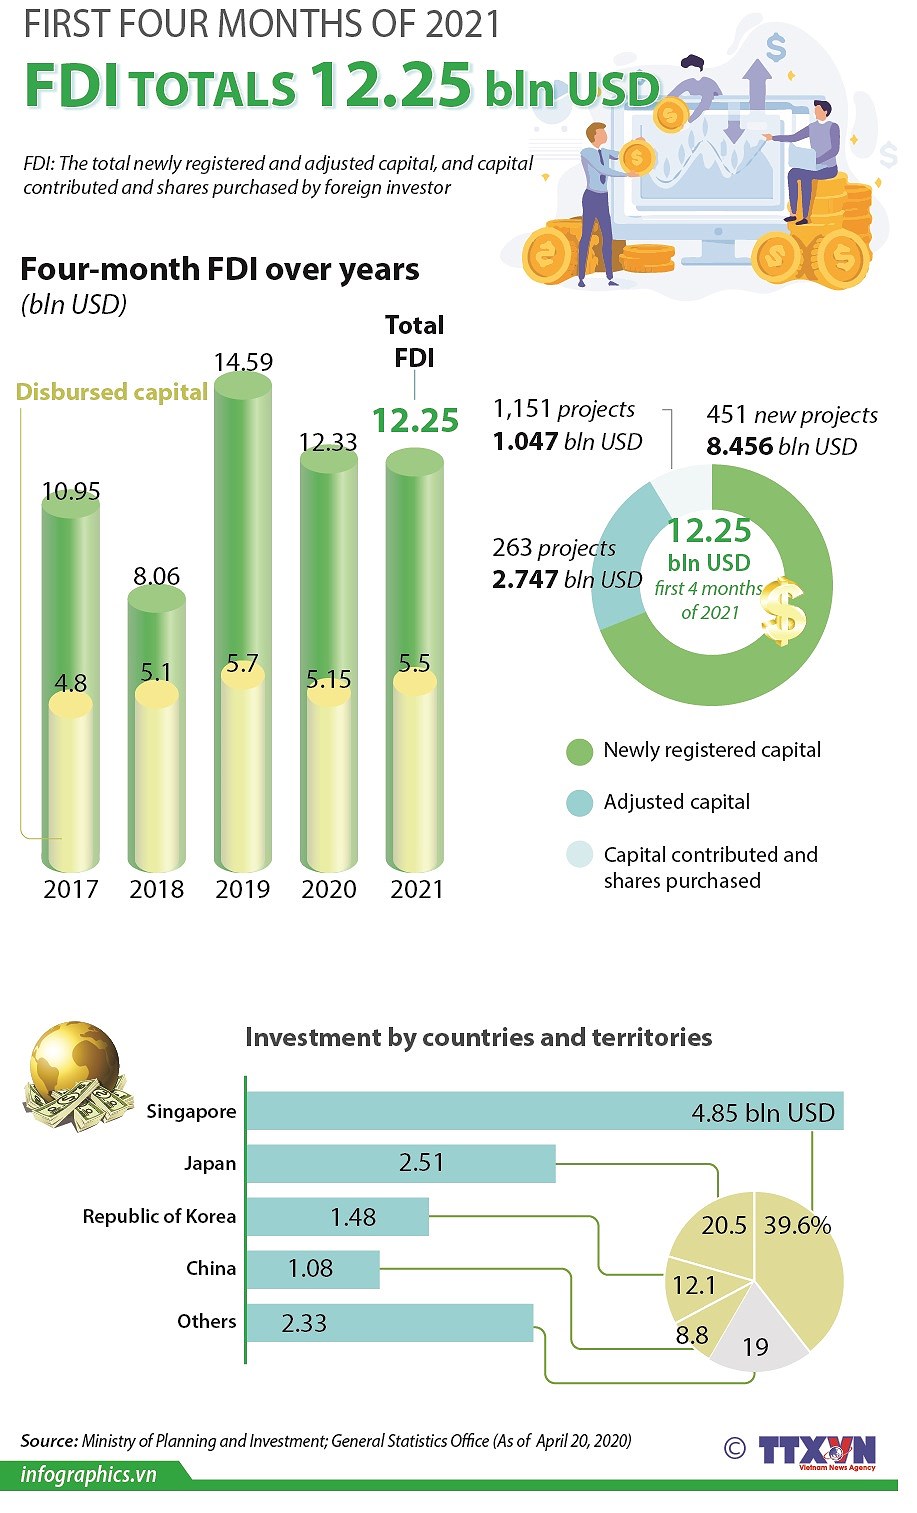 FDI totals 12.25 bln USD in first four months hinh anh 1